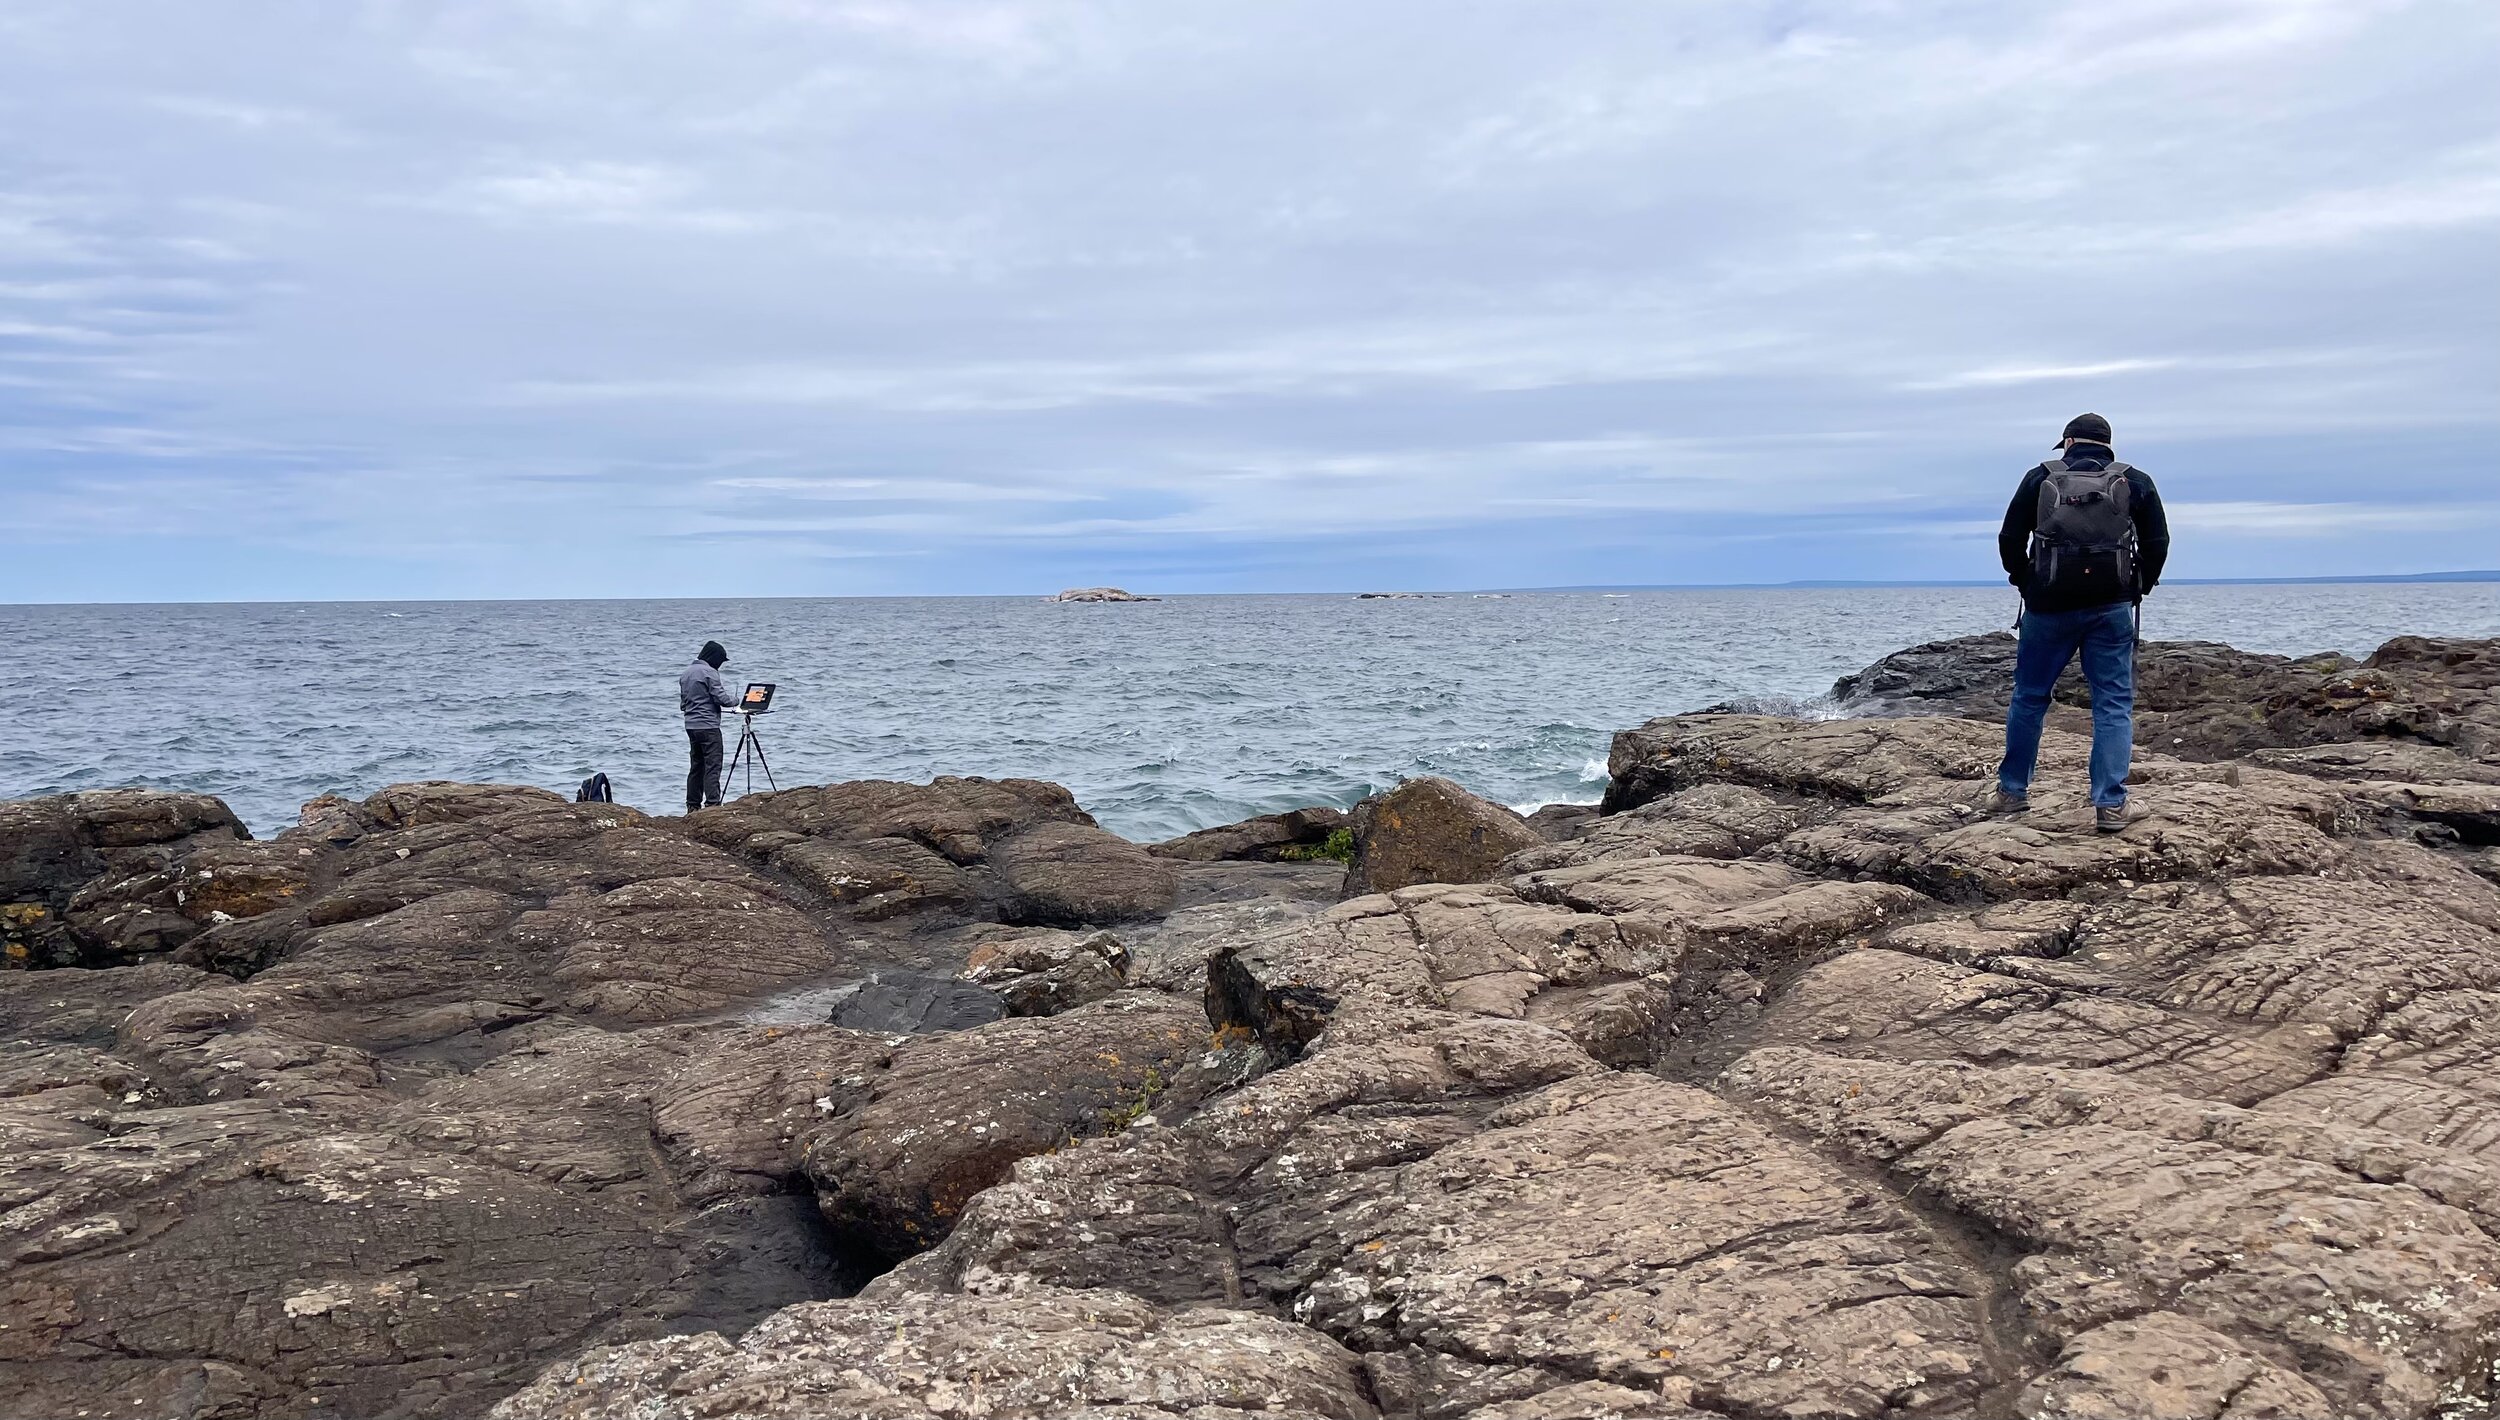  The  Black Rocks  area of Presque Isle Park is a popular place for various outdoor activities, including…painting? Yes, this man had an easel set up in the frigid winds and worked on his masterpiece. 🎨🖌 